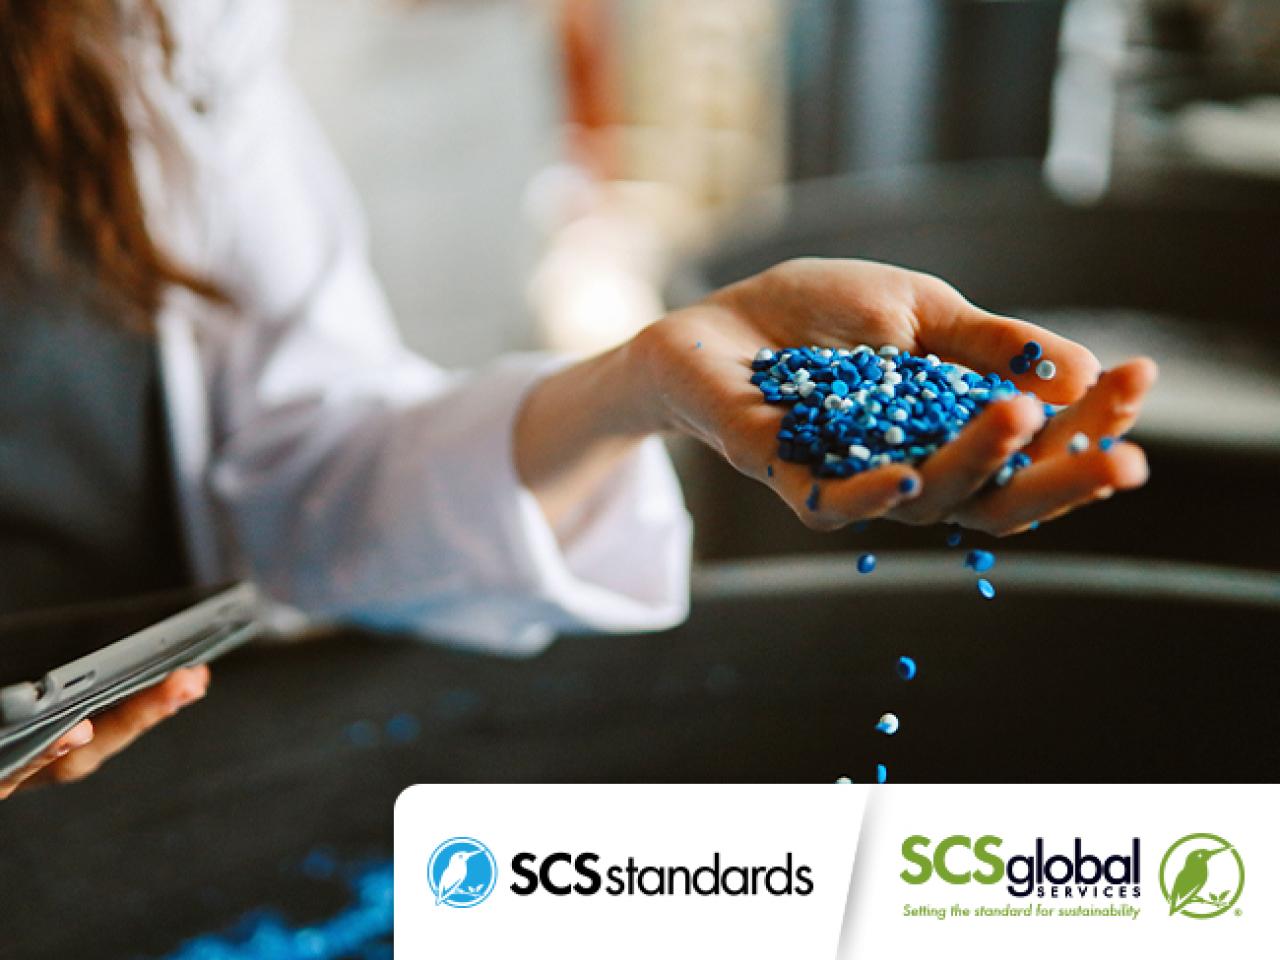 SCS Standards Releases Updated SCS-103 Certification Standard for Recycled Content 